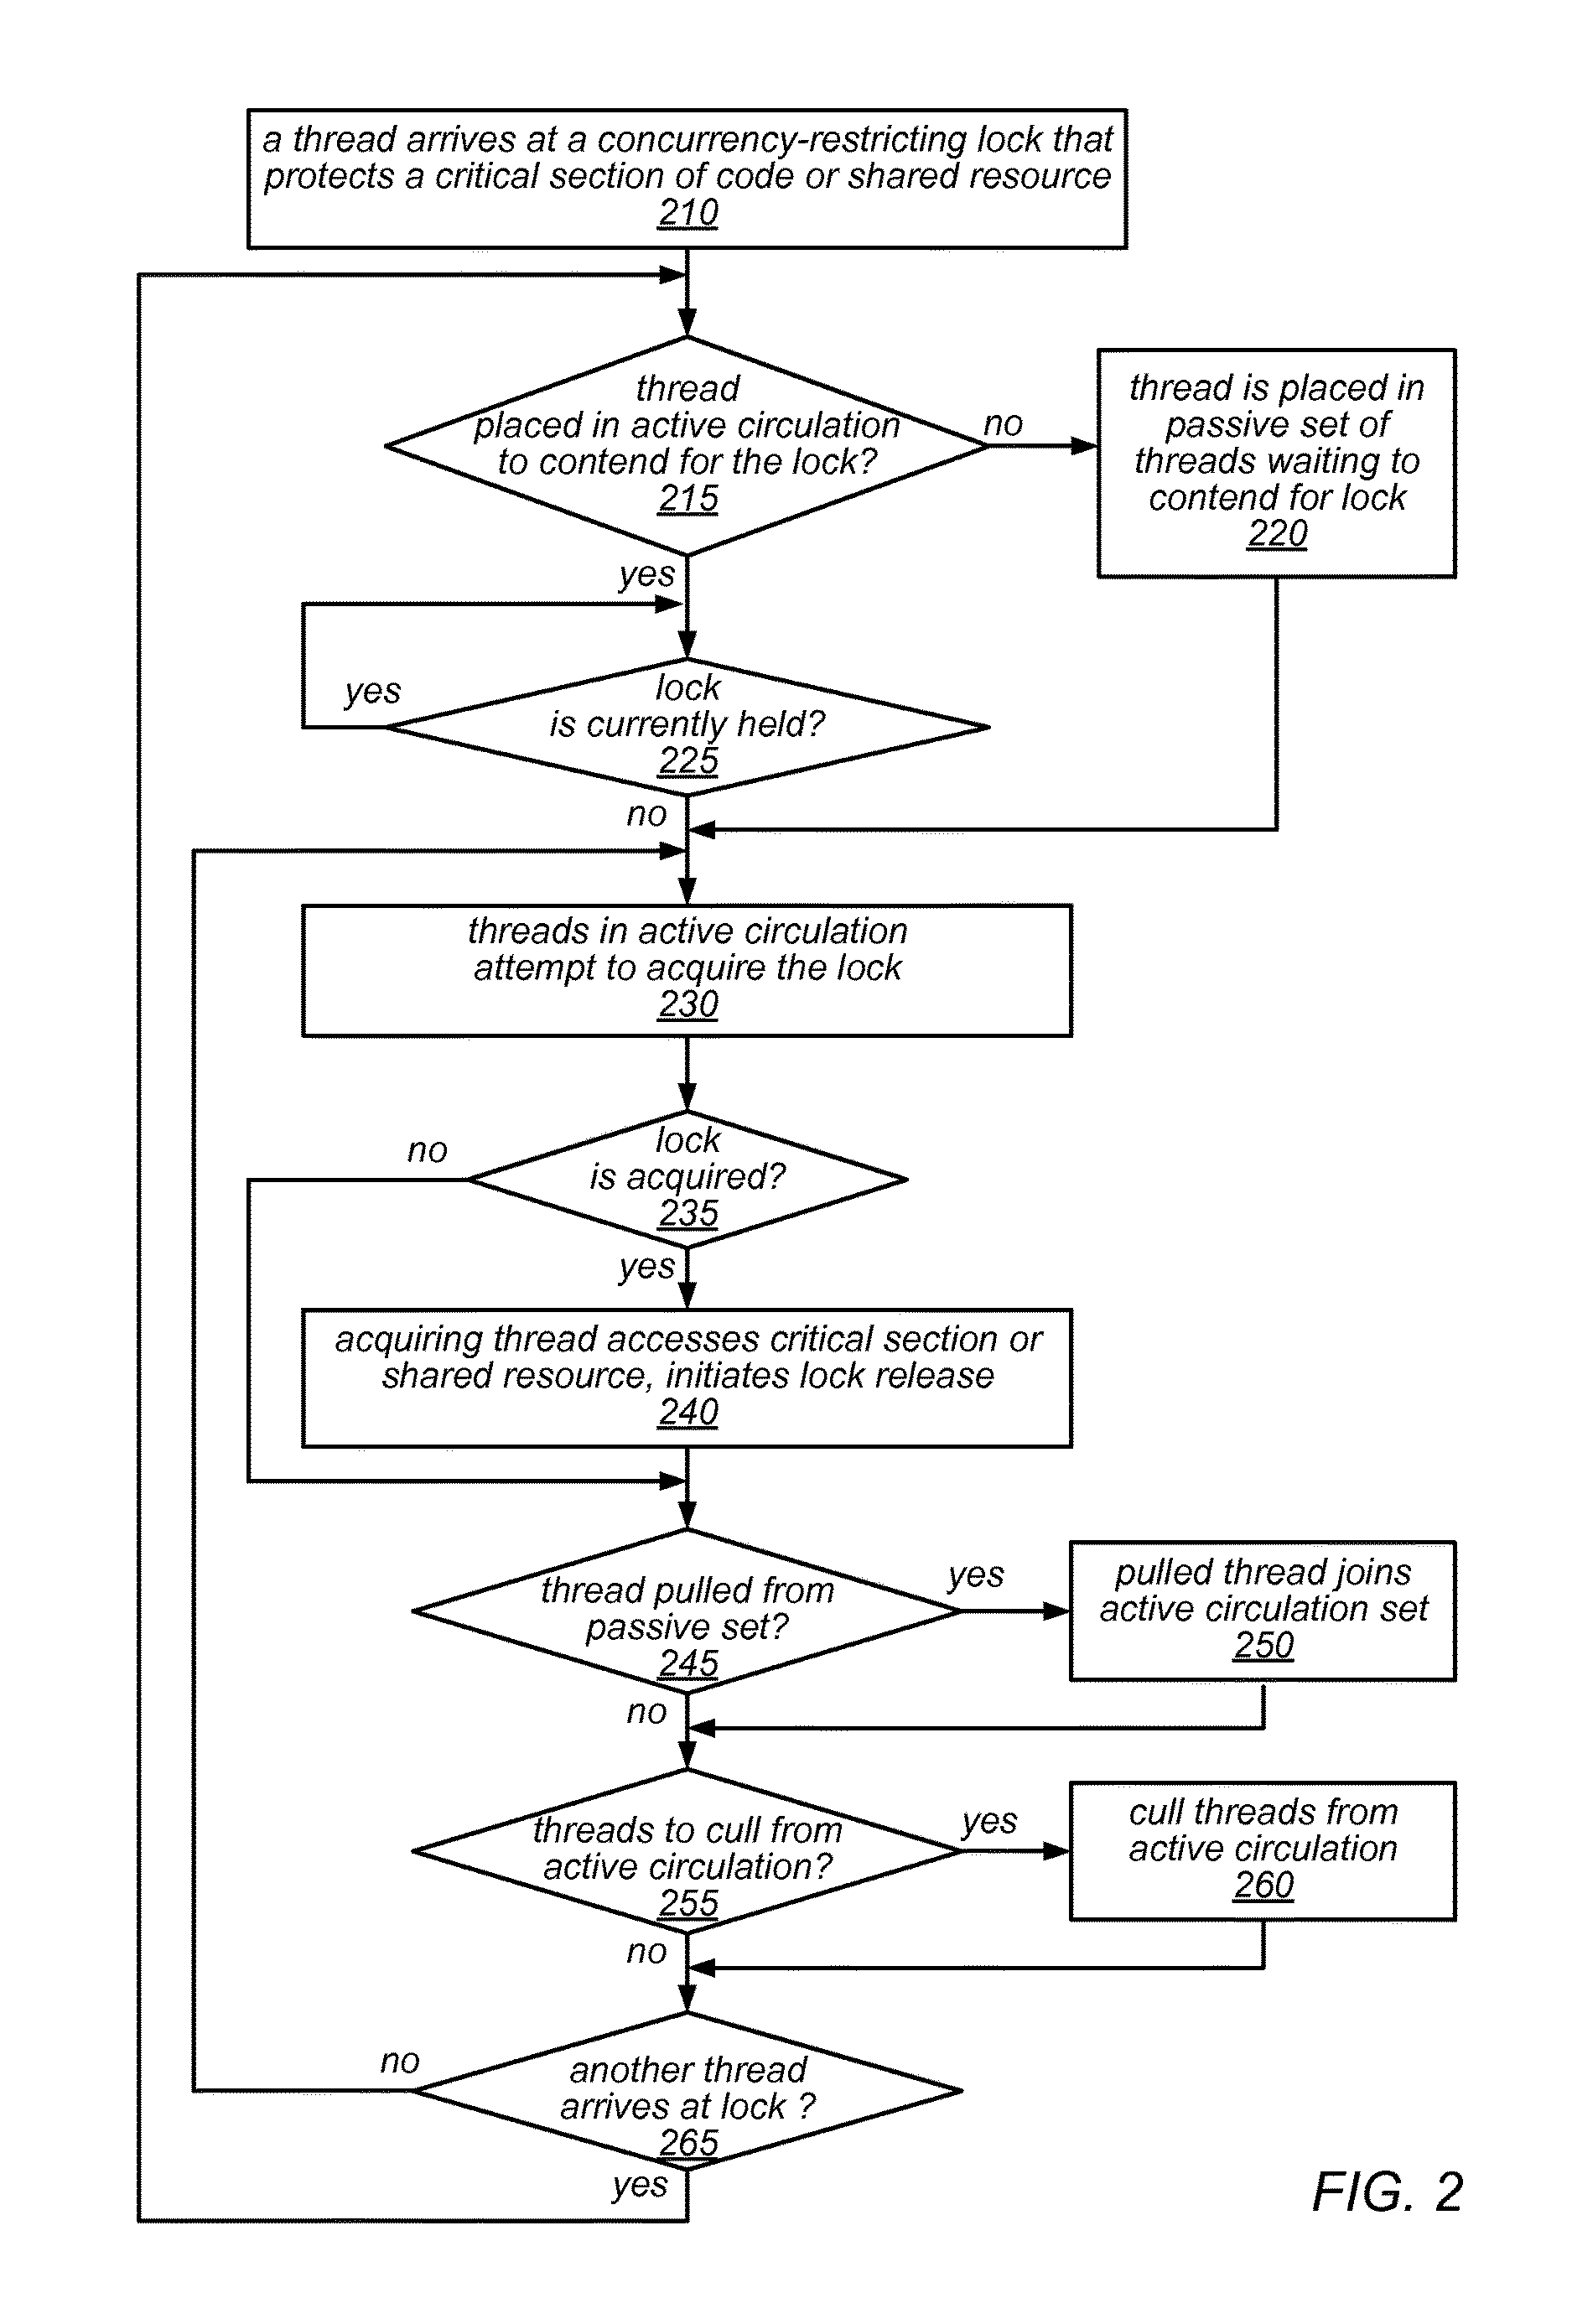 Systems and Methods for Performing Concurrency Restriction and Throttling over Contended Locks